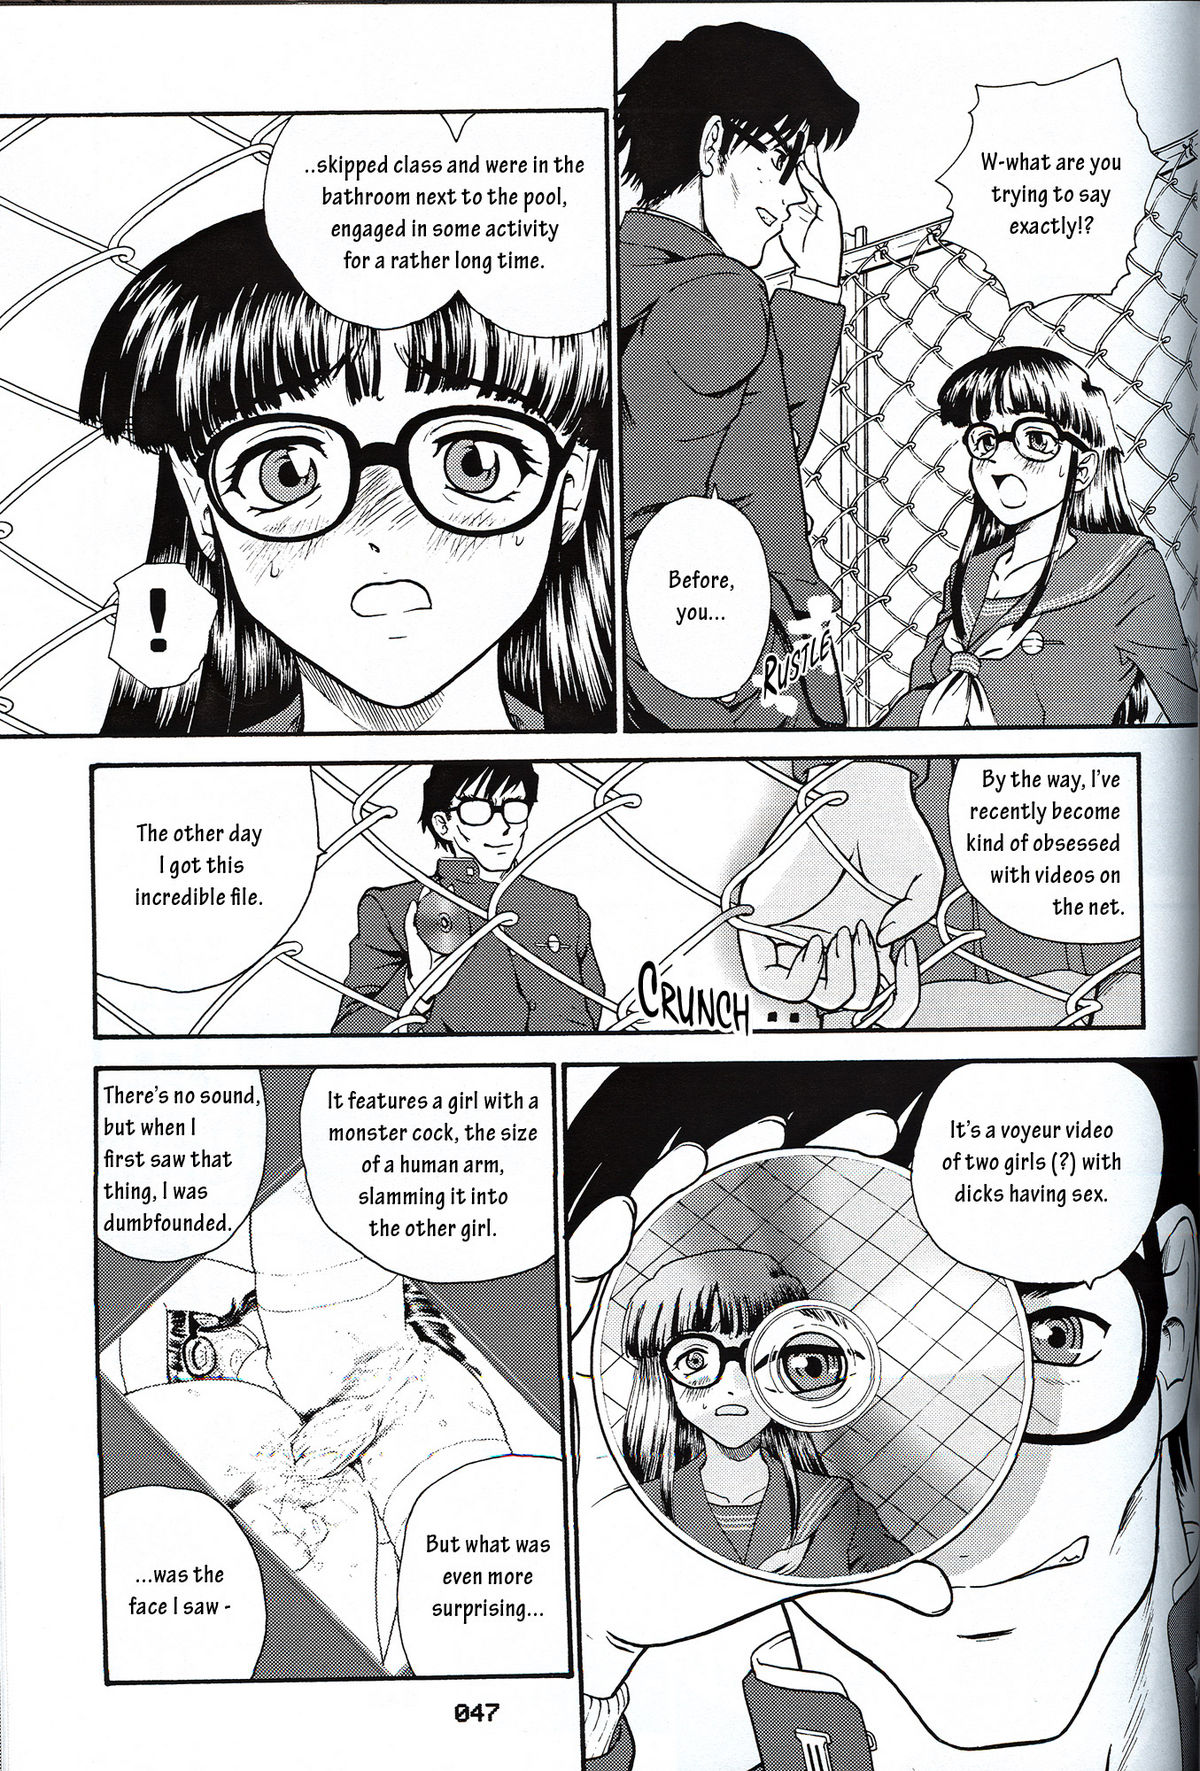 (SC19) [Behind Moon (Q)] Dulce Report 3 [English] page 46 full